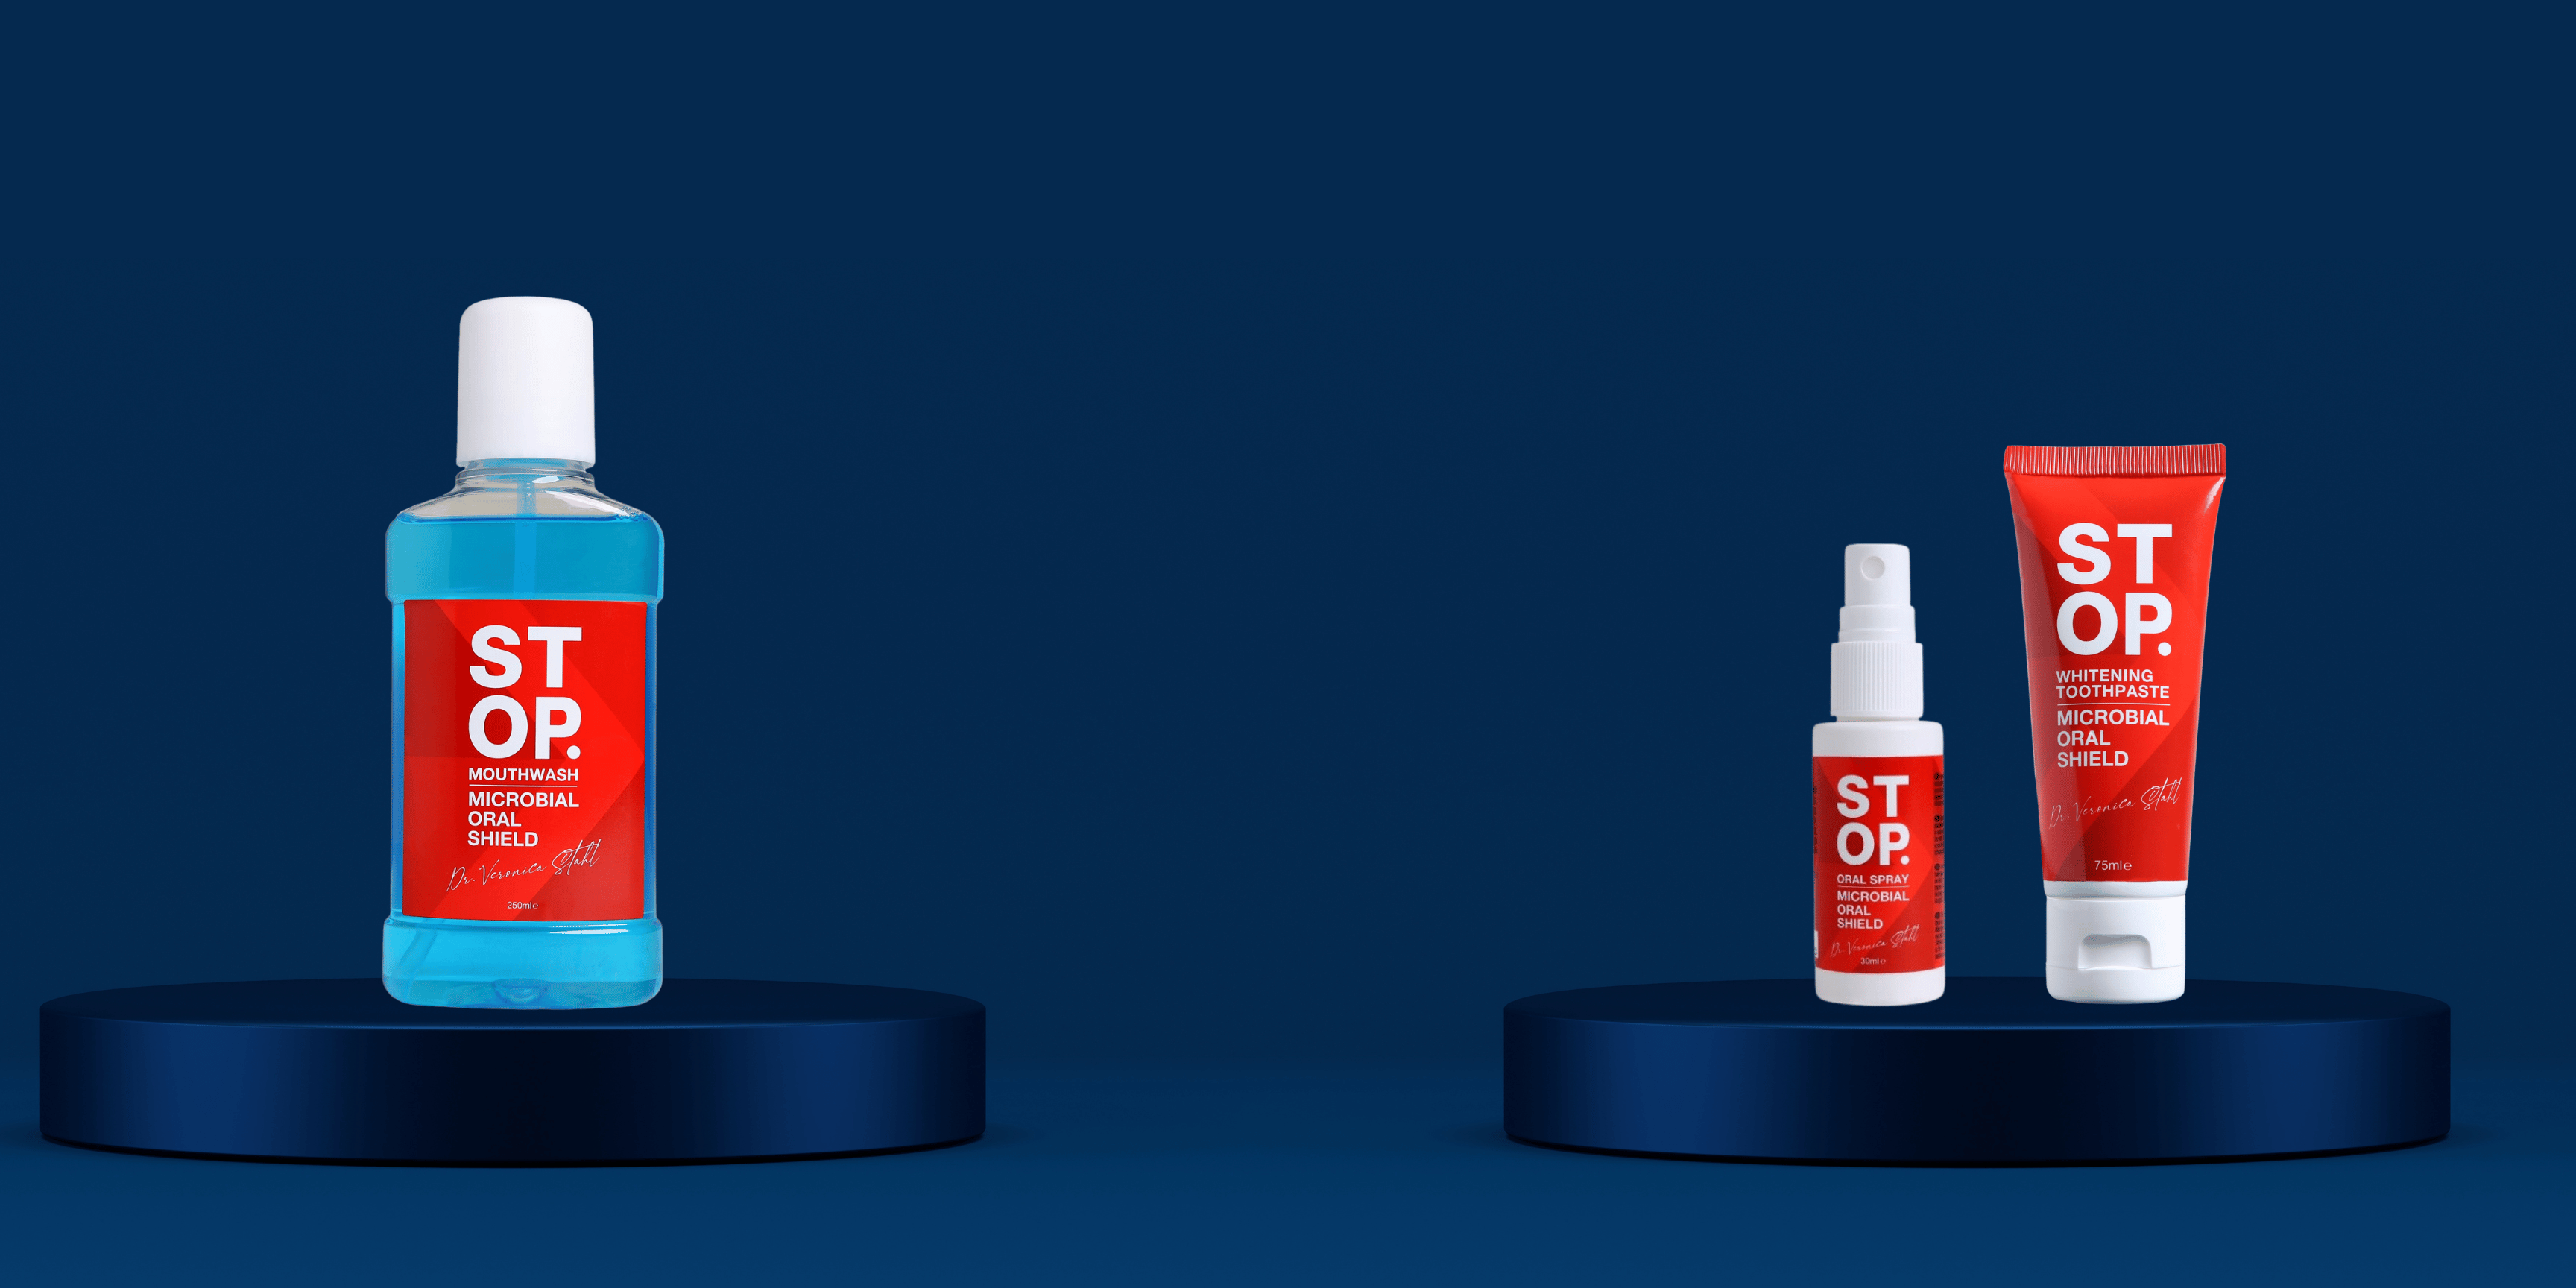 Oral care products labeled 'STOP' including mouthwash, oral spray, and toothpaste on blue platforms against a deep blue background.